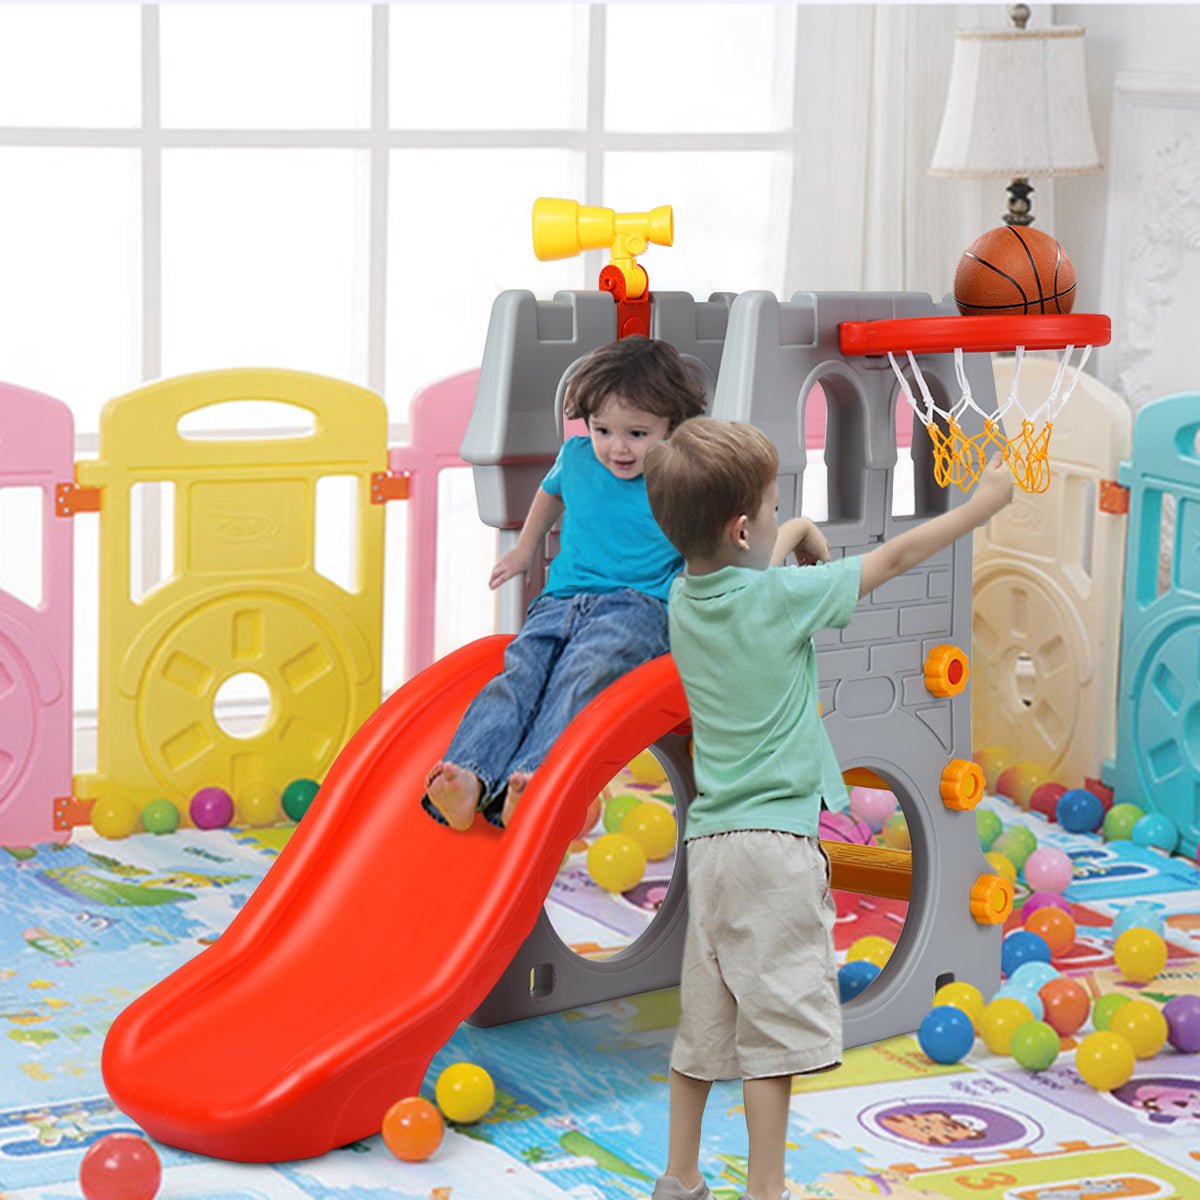 Children's Climber Slide with Basketball Hoop - Active Play for Indoors & Outdoors